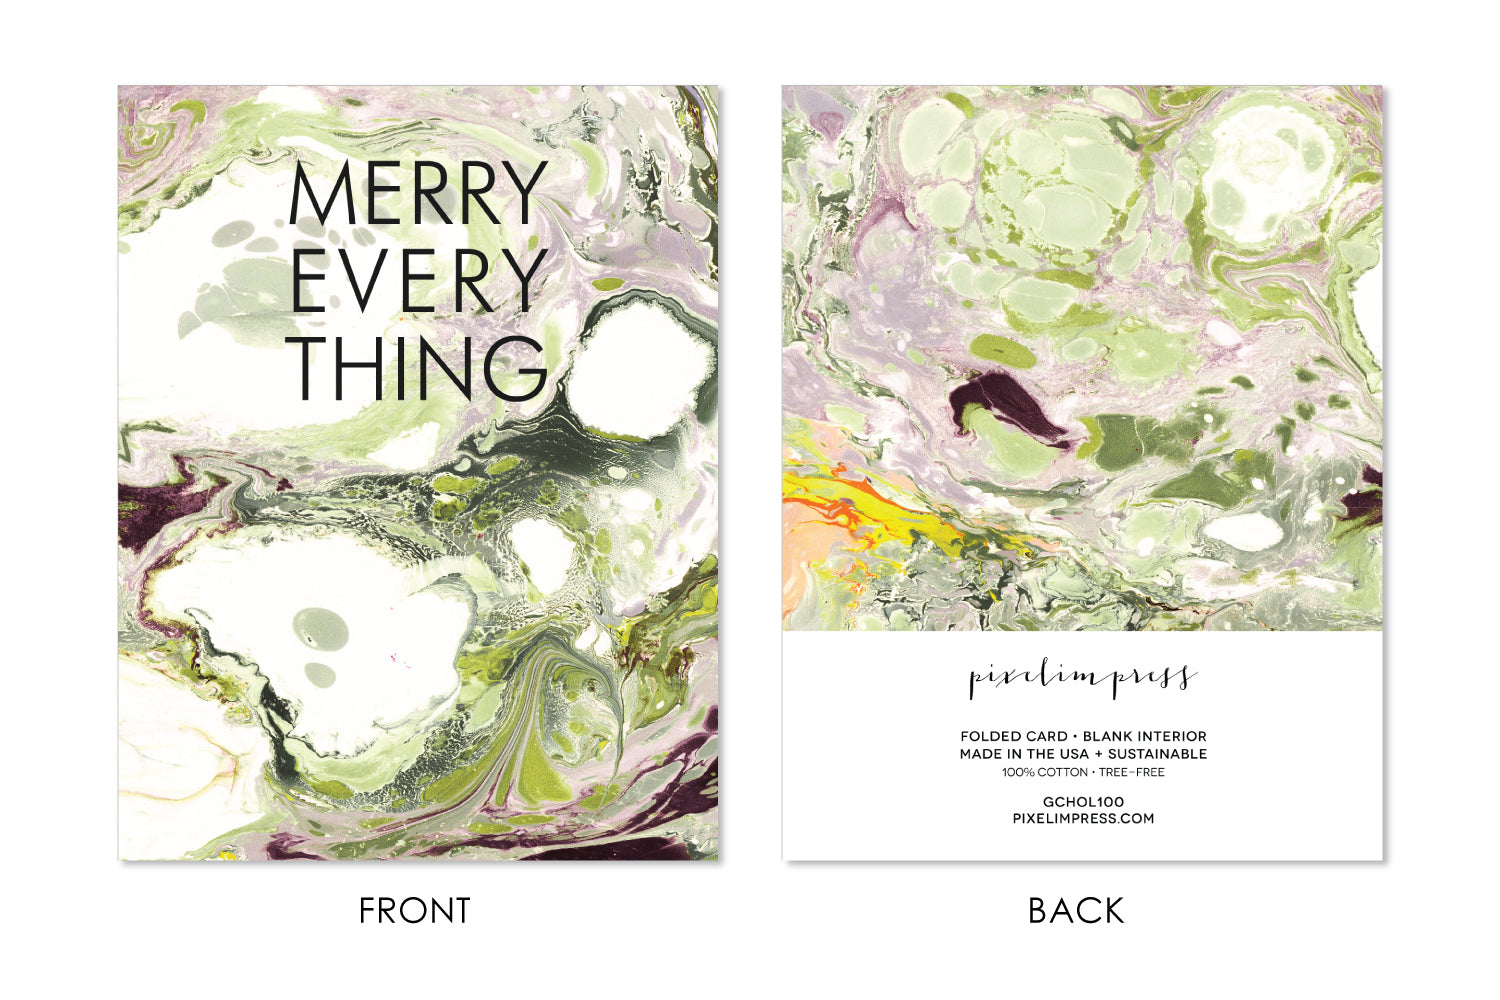 MERRY EVERYTHING Boxed Set Holiday Marble Cards